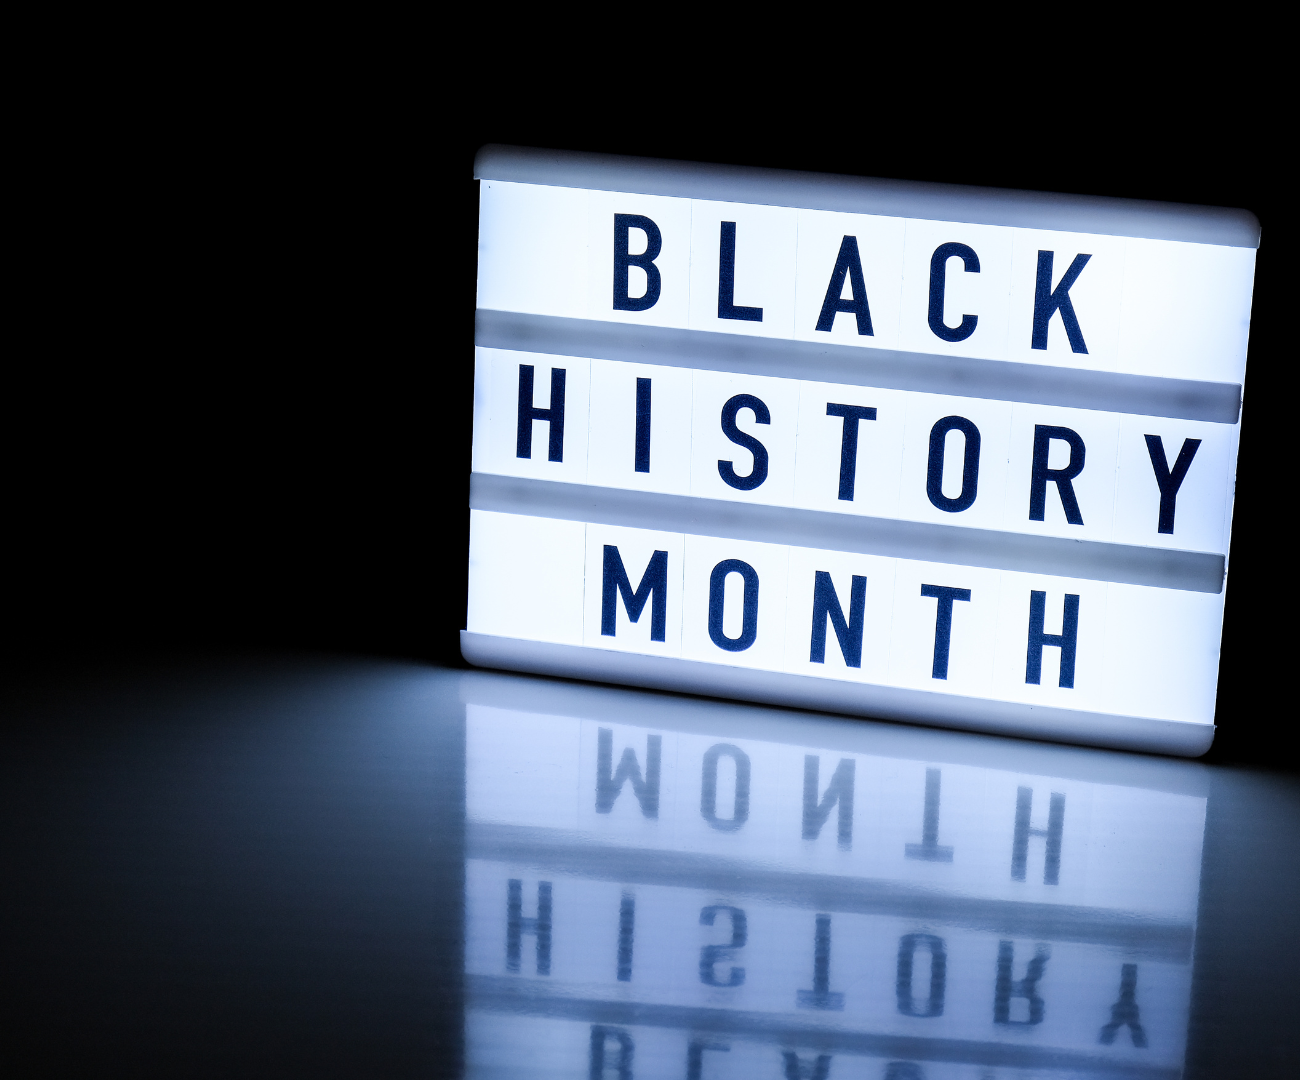 Attend a Black History event in your community